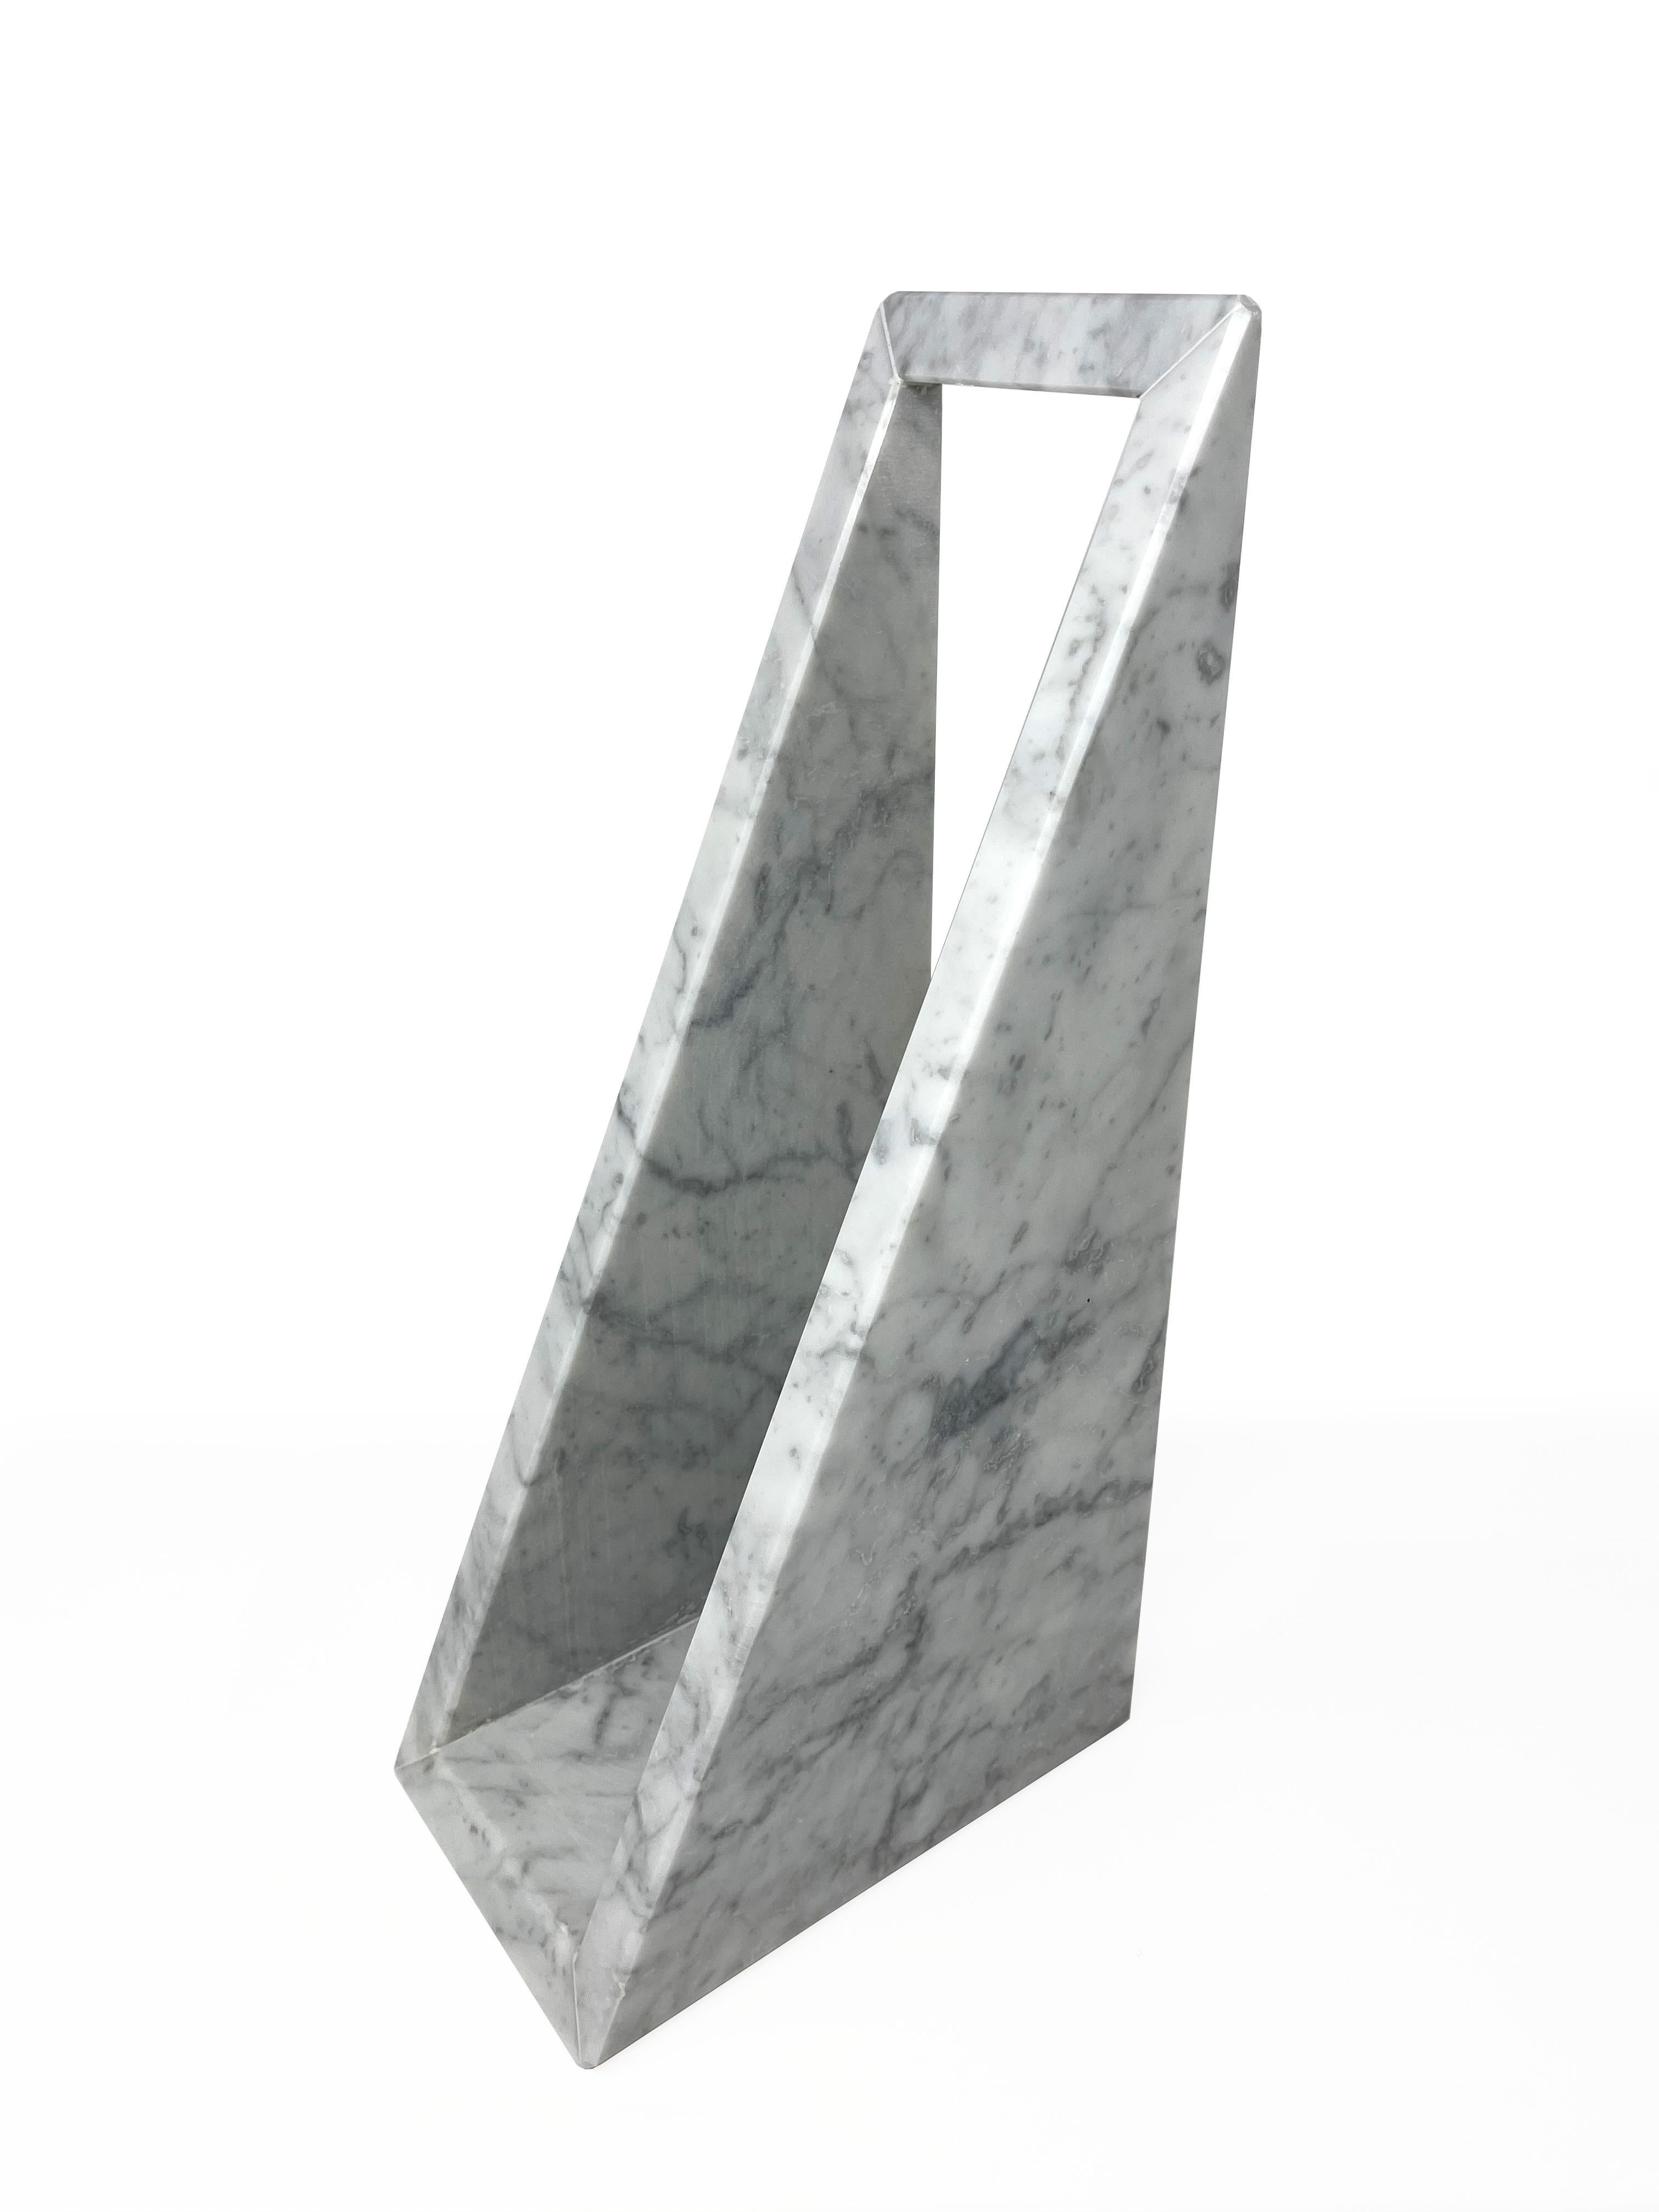 Aria 'Air', 21st Century Modern Bianco Carrara Marble Bookend In New Condition For Sale In Cologna Veneta, IT